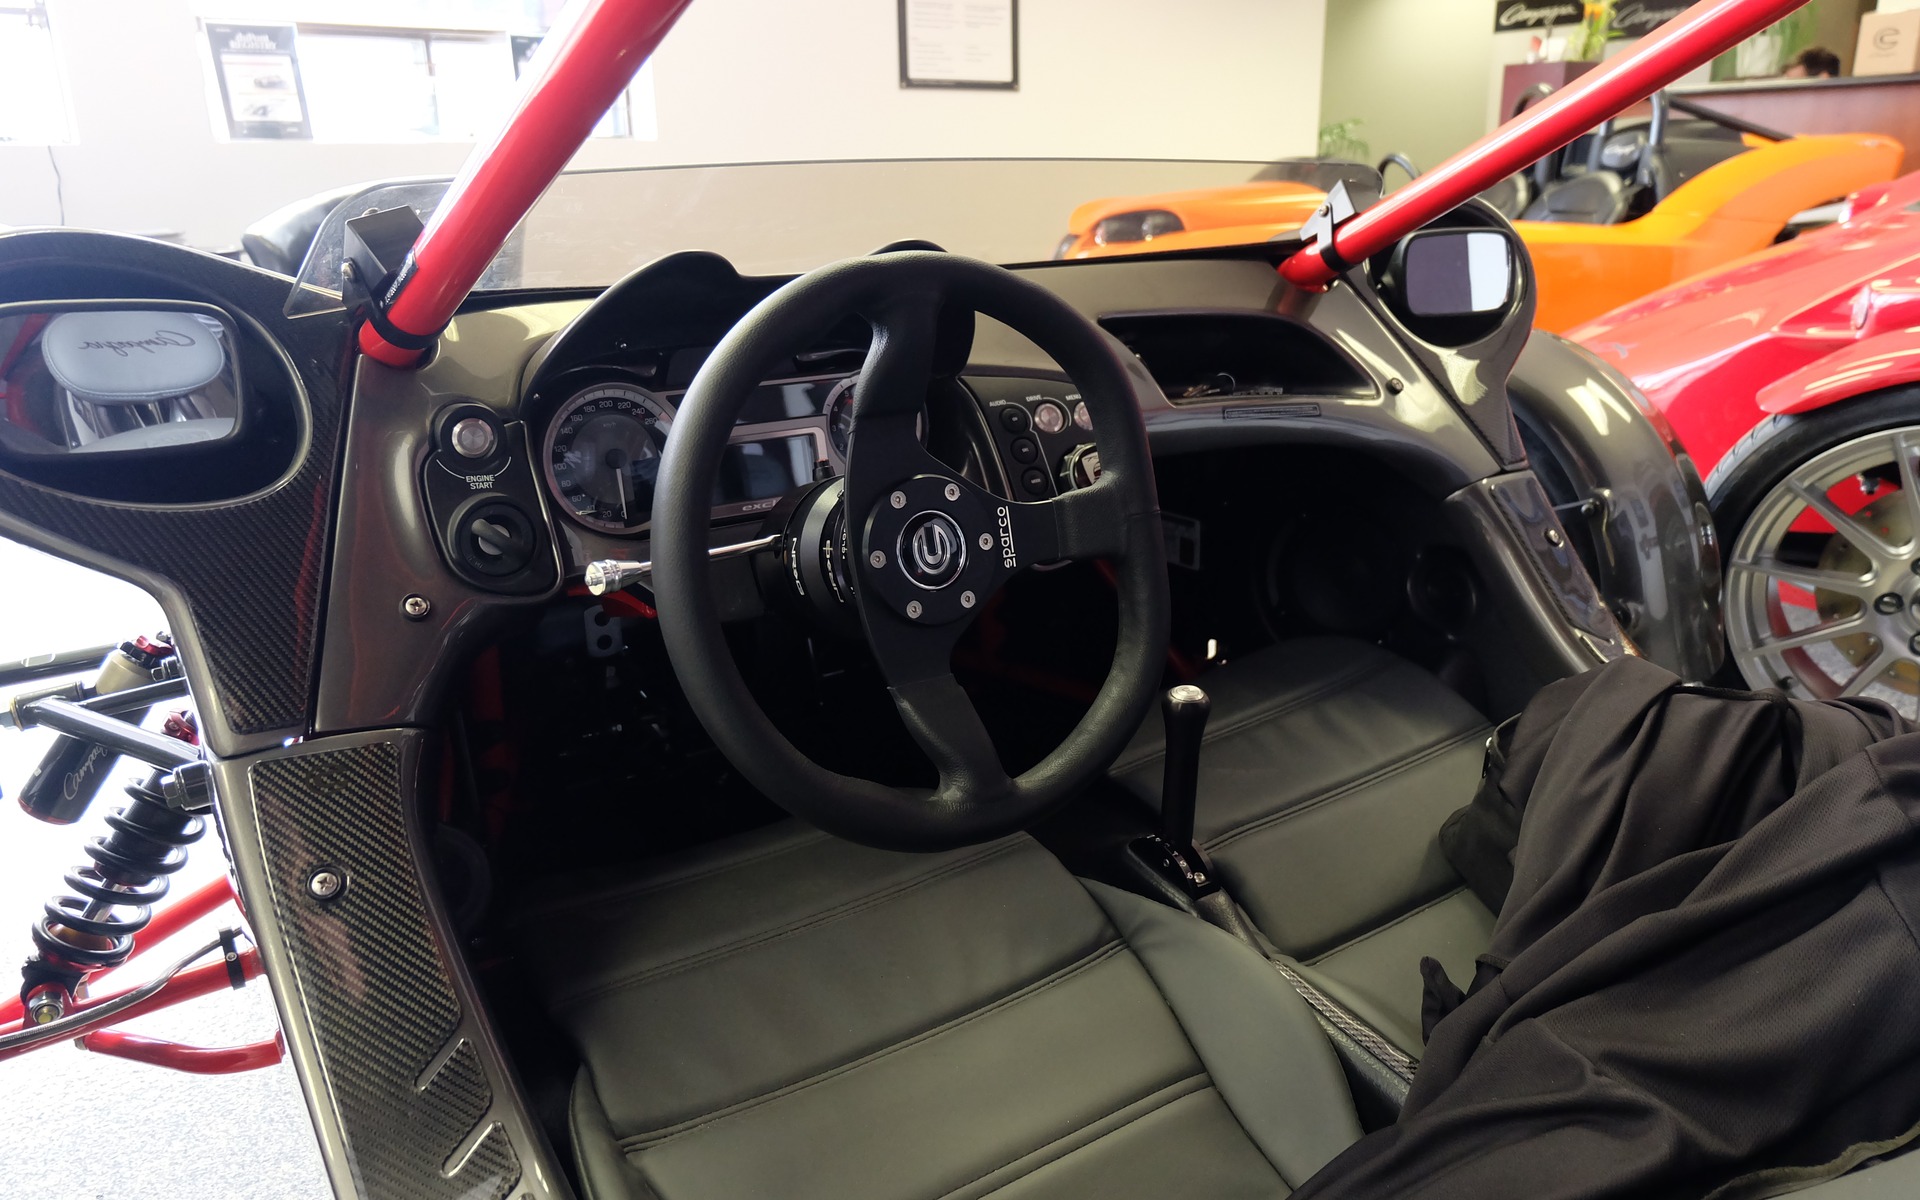 The barebones interior is enhanced by a leather-covered steering wheel.